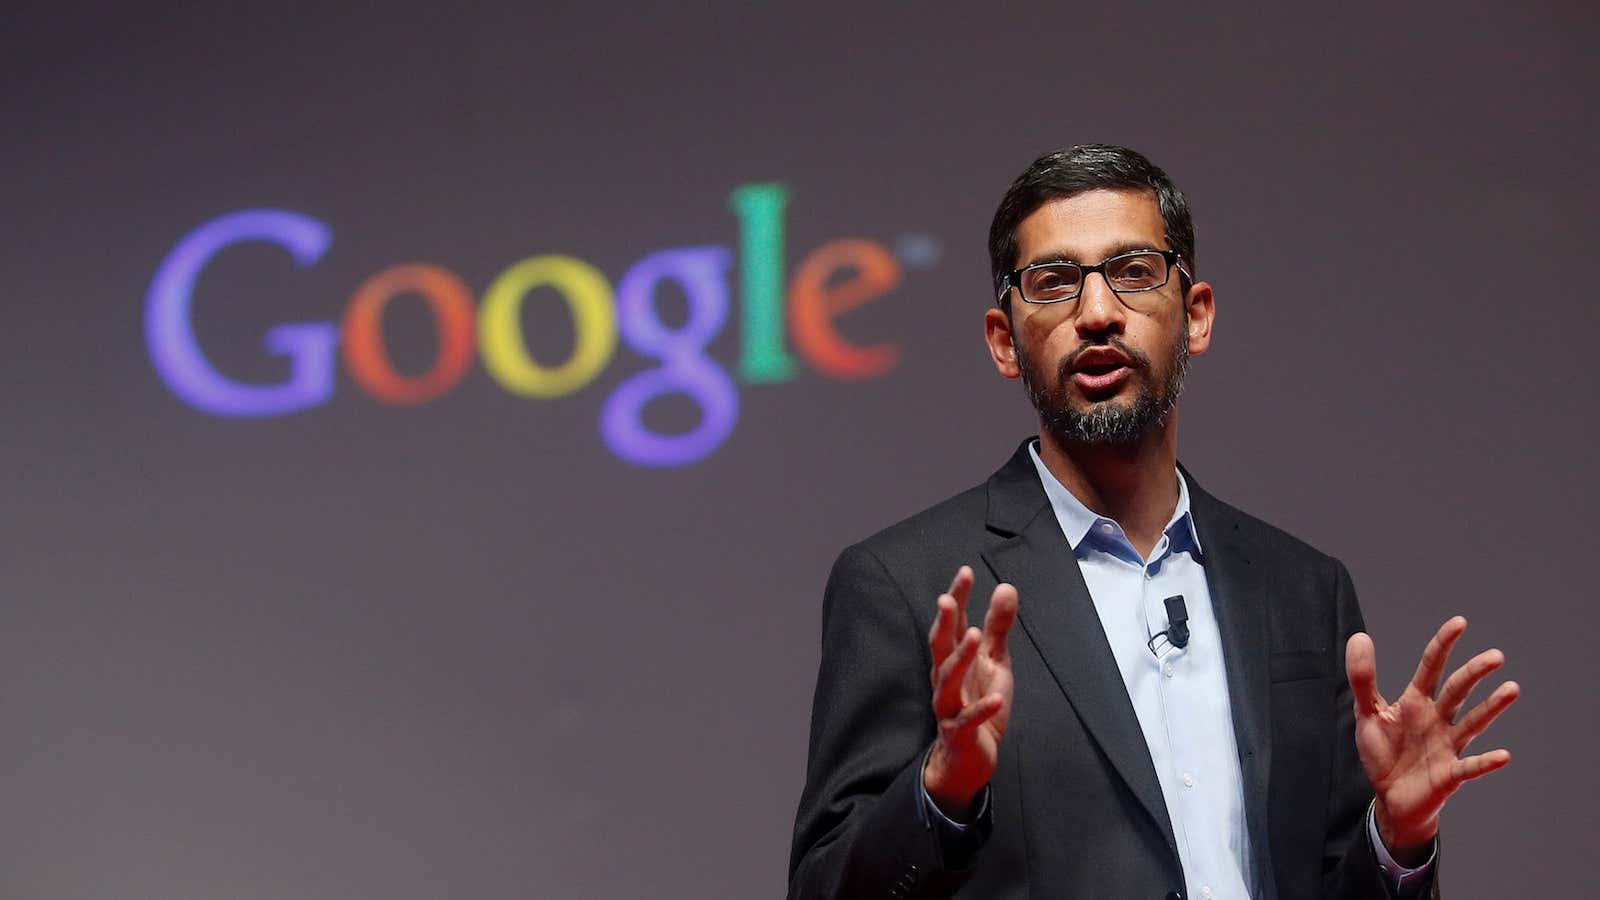 Google’s CEO Sundar Pinchai has a new plan to keep Google employees from leaving the tech giant.